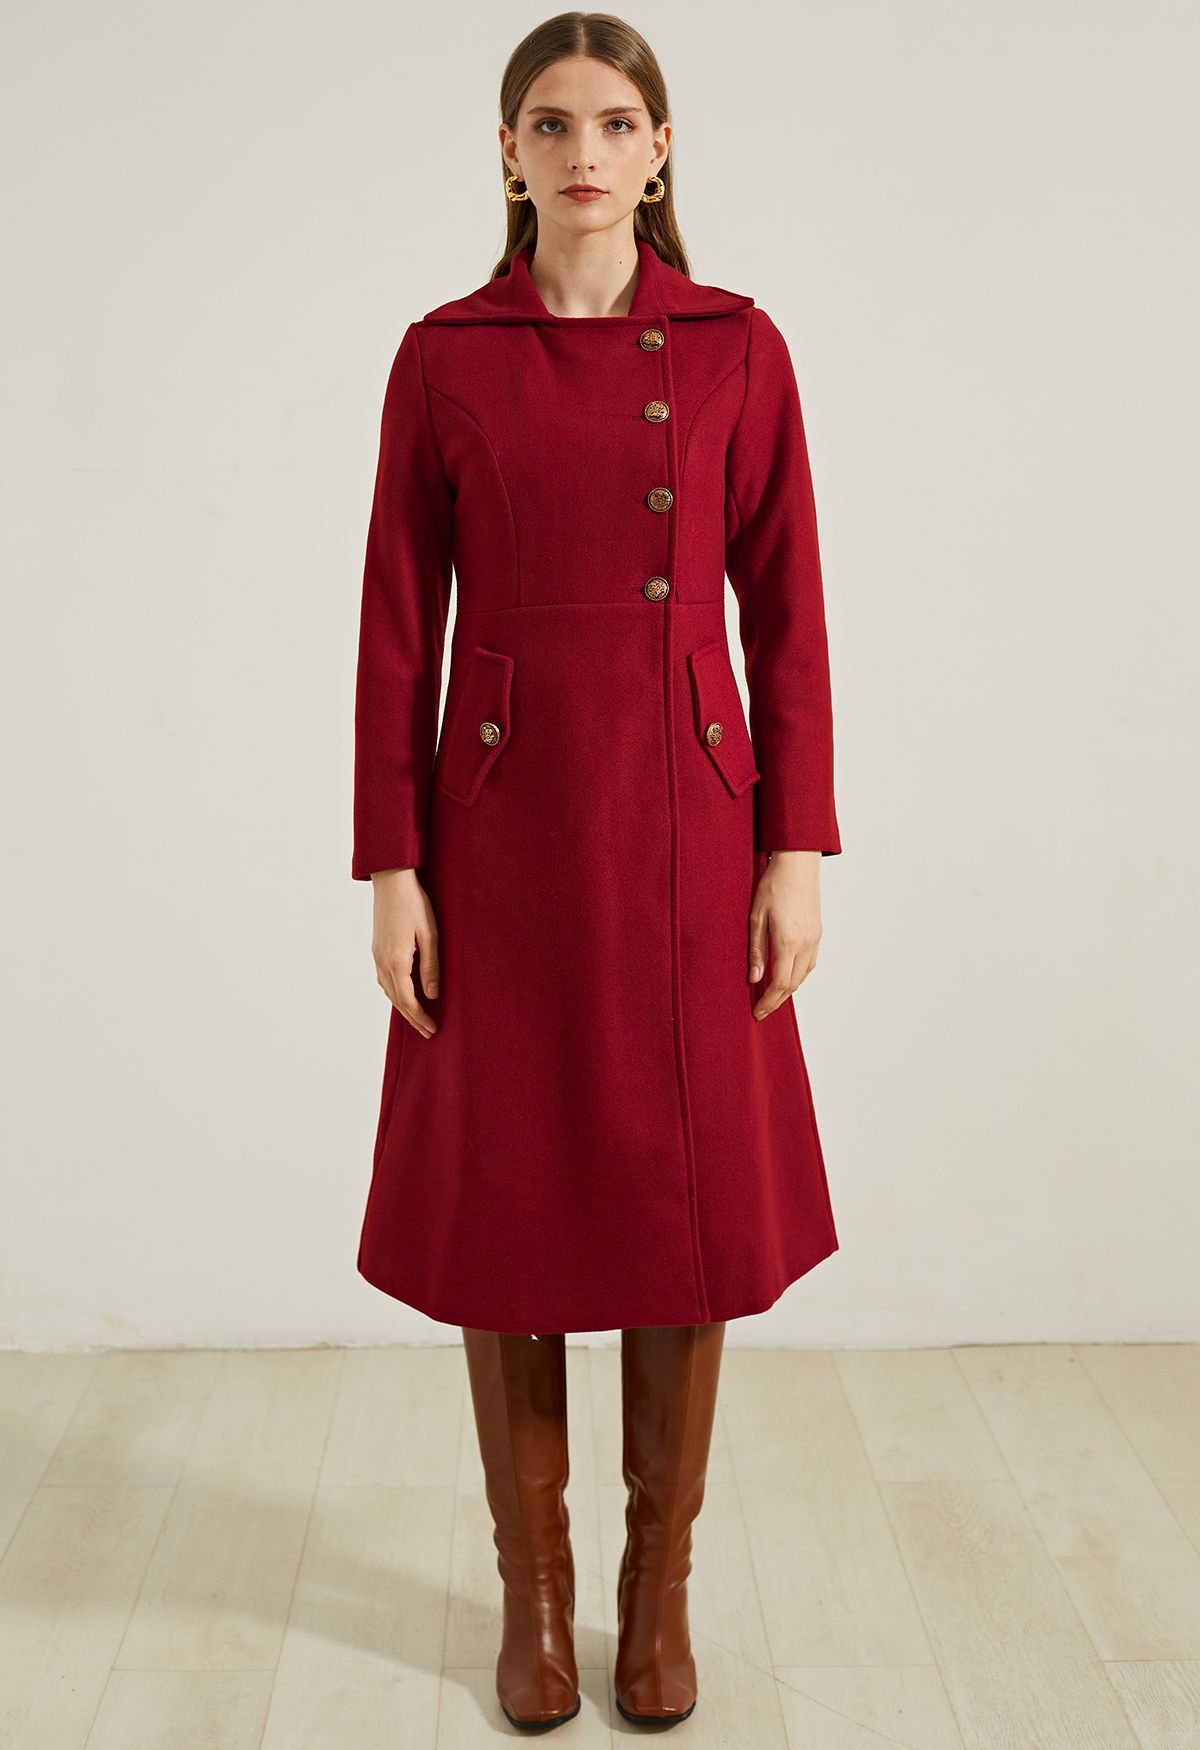 Modish Golden Button Wool-Blend Longline Coat in Red | Chicwish